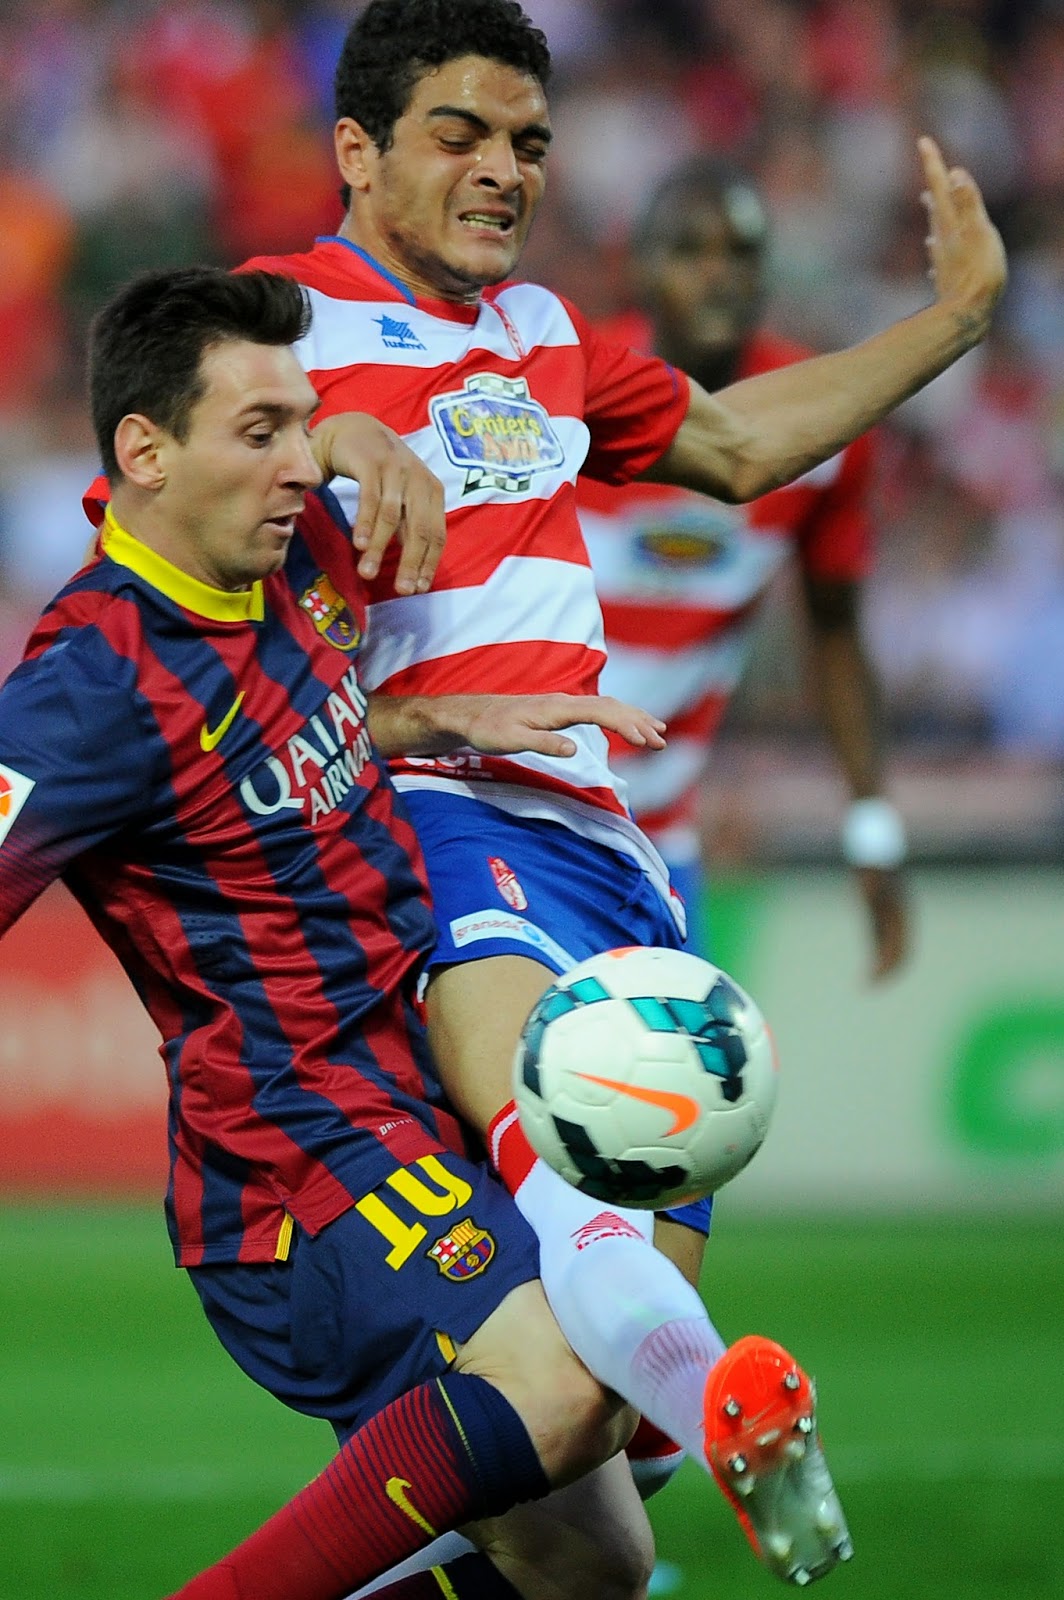 Lionel Messi to sign new Barcelona contract worth £15.5m - Images Archival Store1064 x 1600